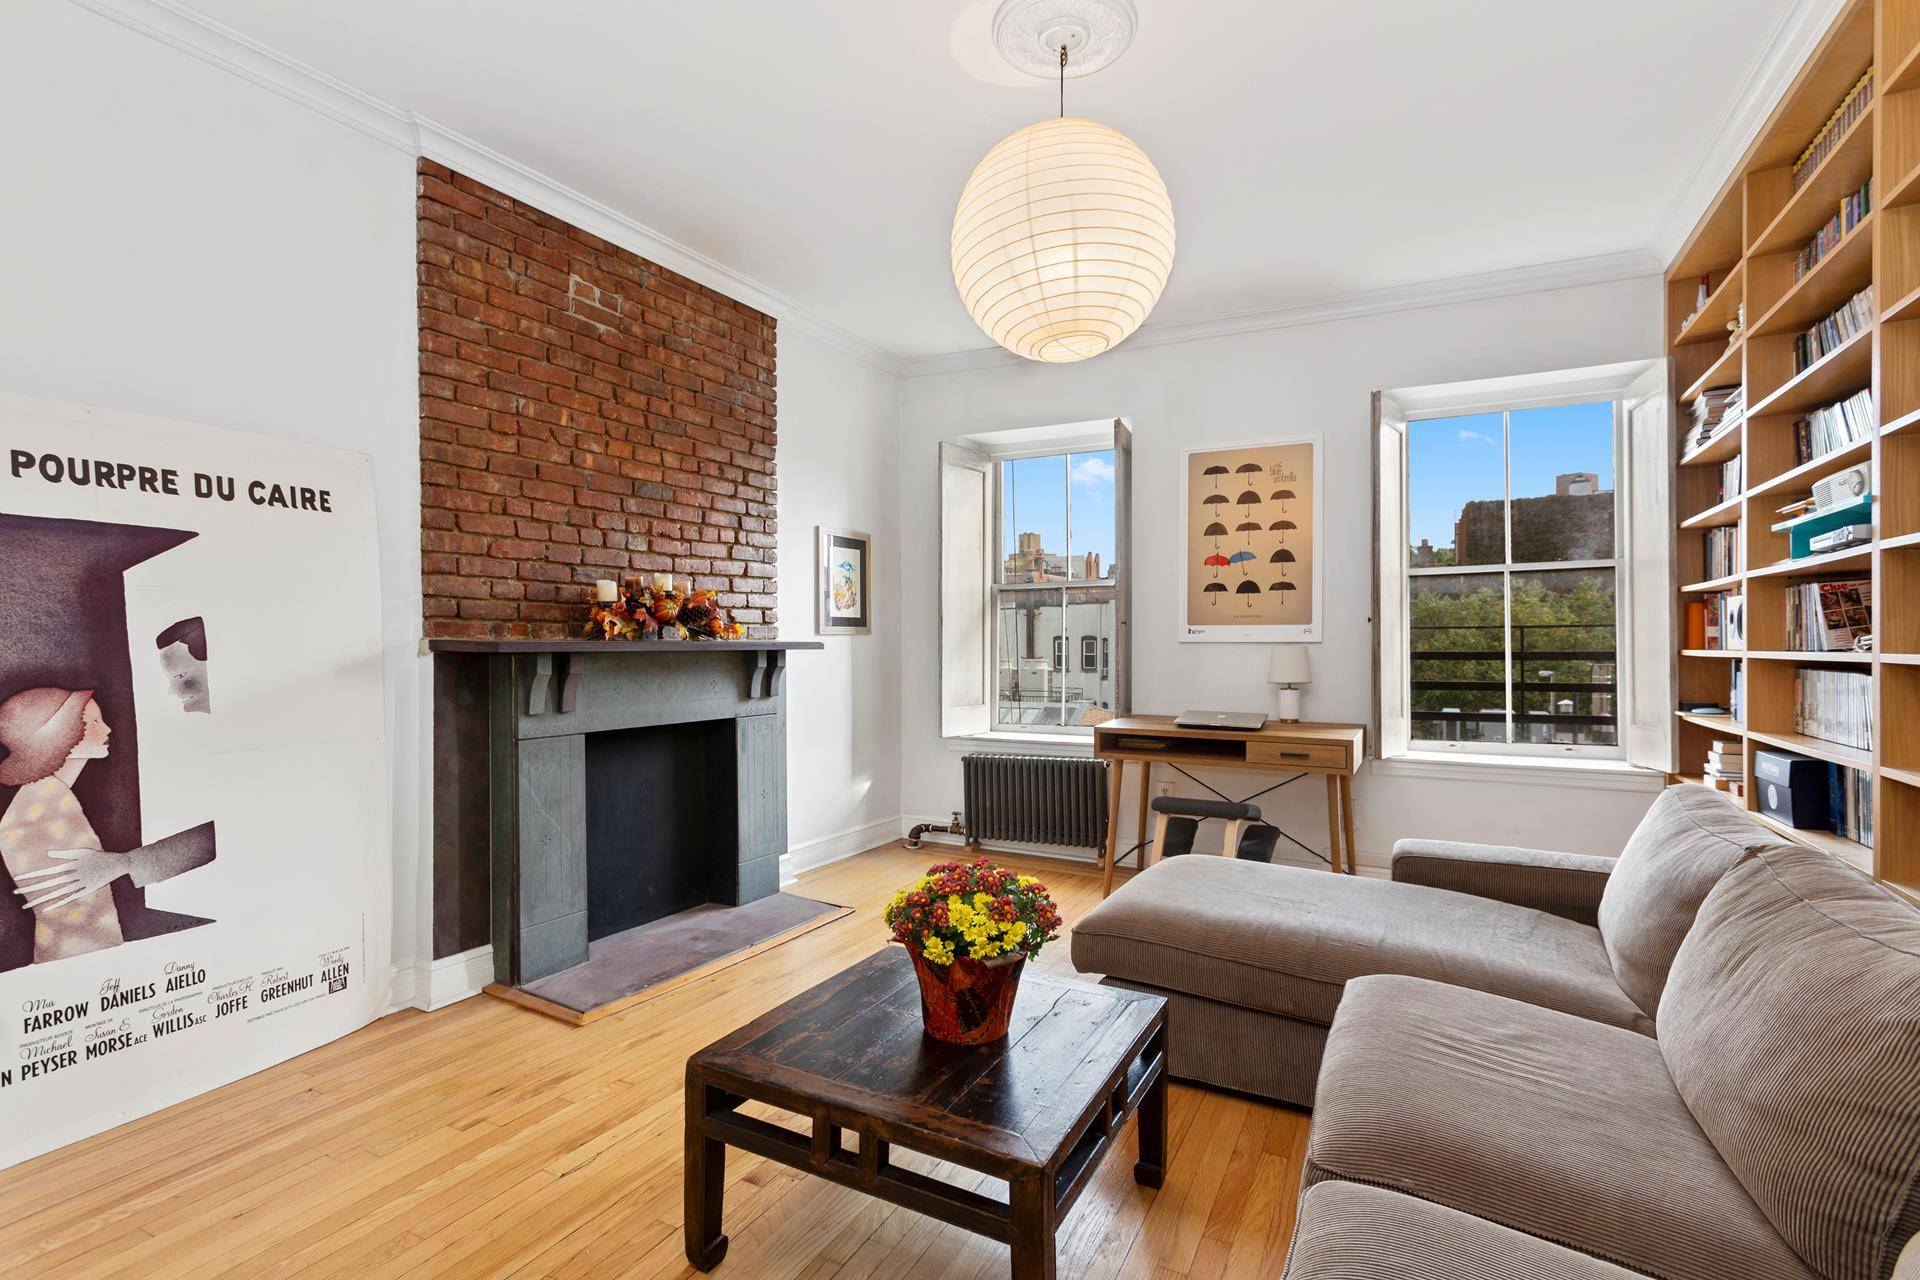 You will love your new home in the heart of the West Village, located on one of NYC's most iconic streets.